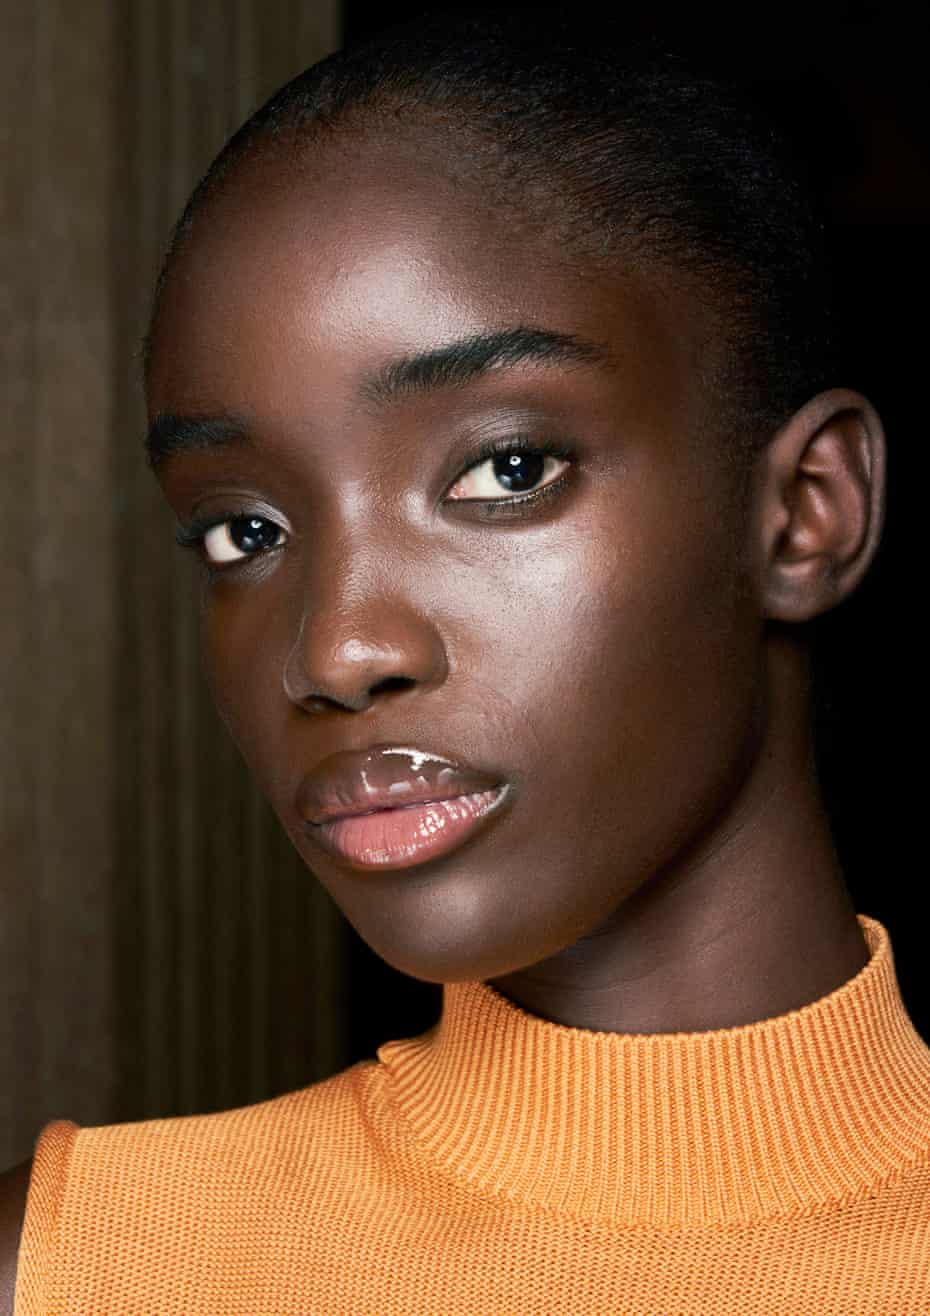 Get the glow: skincare as seen at Ferragamo.